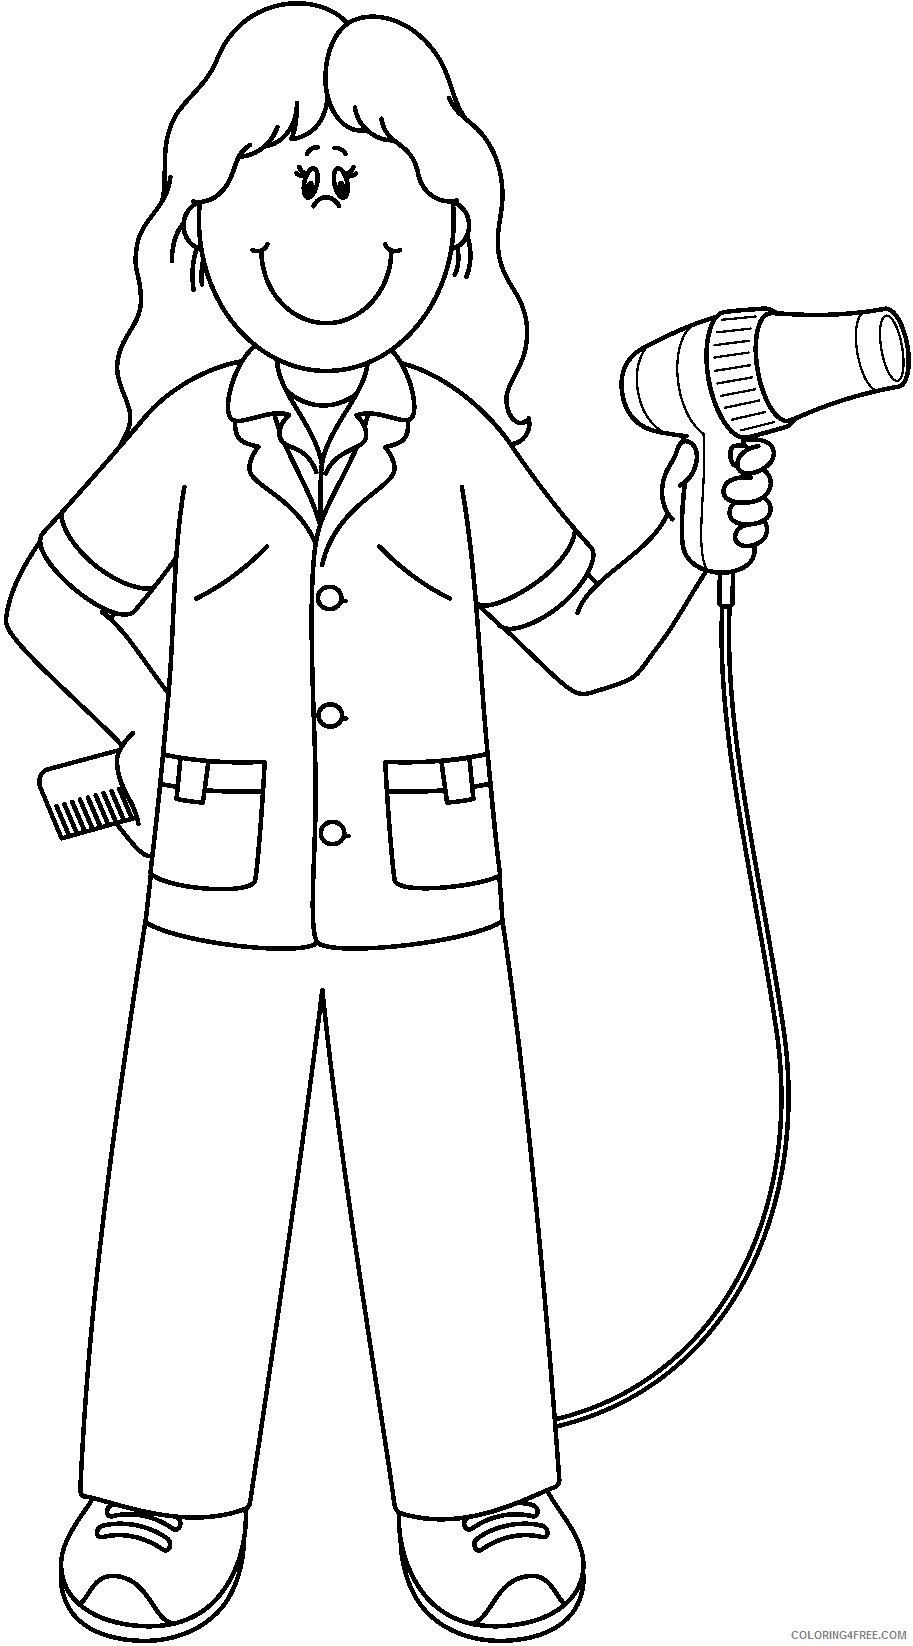 printable community helpers coloring pages for kids Coloring4free